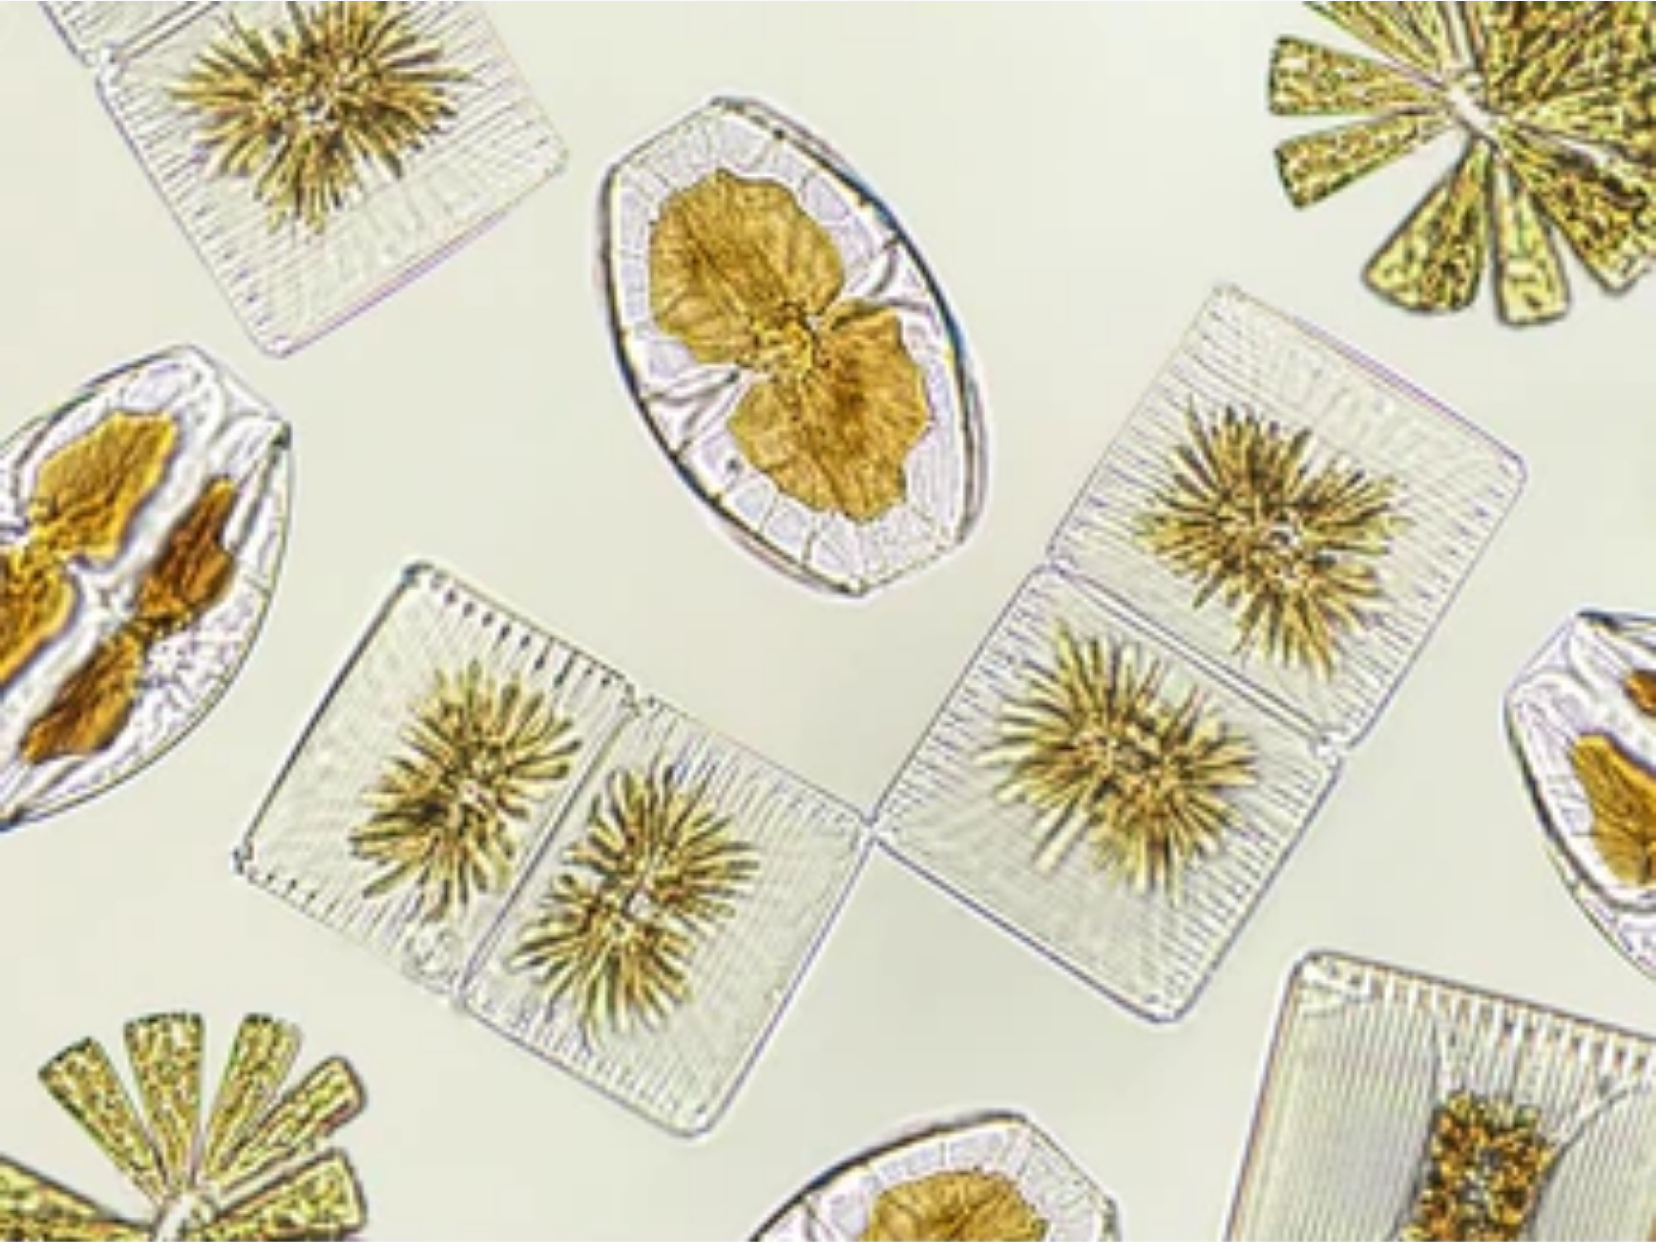 Read more about the article What Snails Eat Diatoms? An Aquarist’s Guide